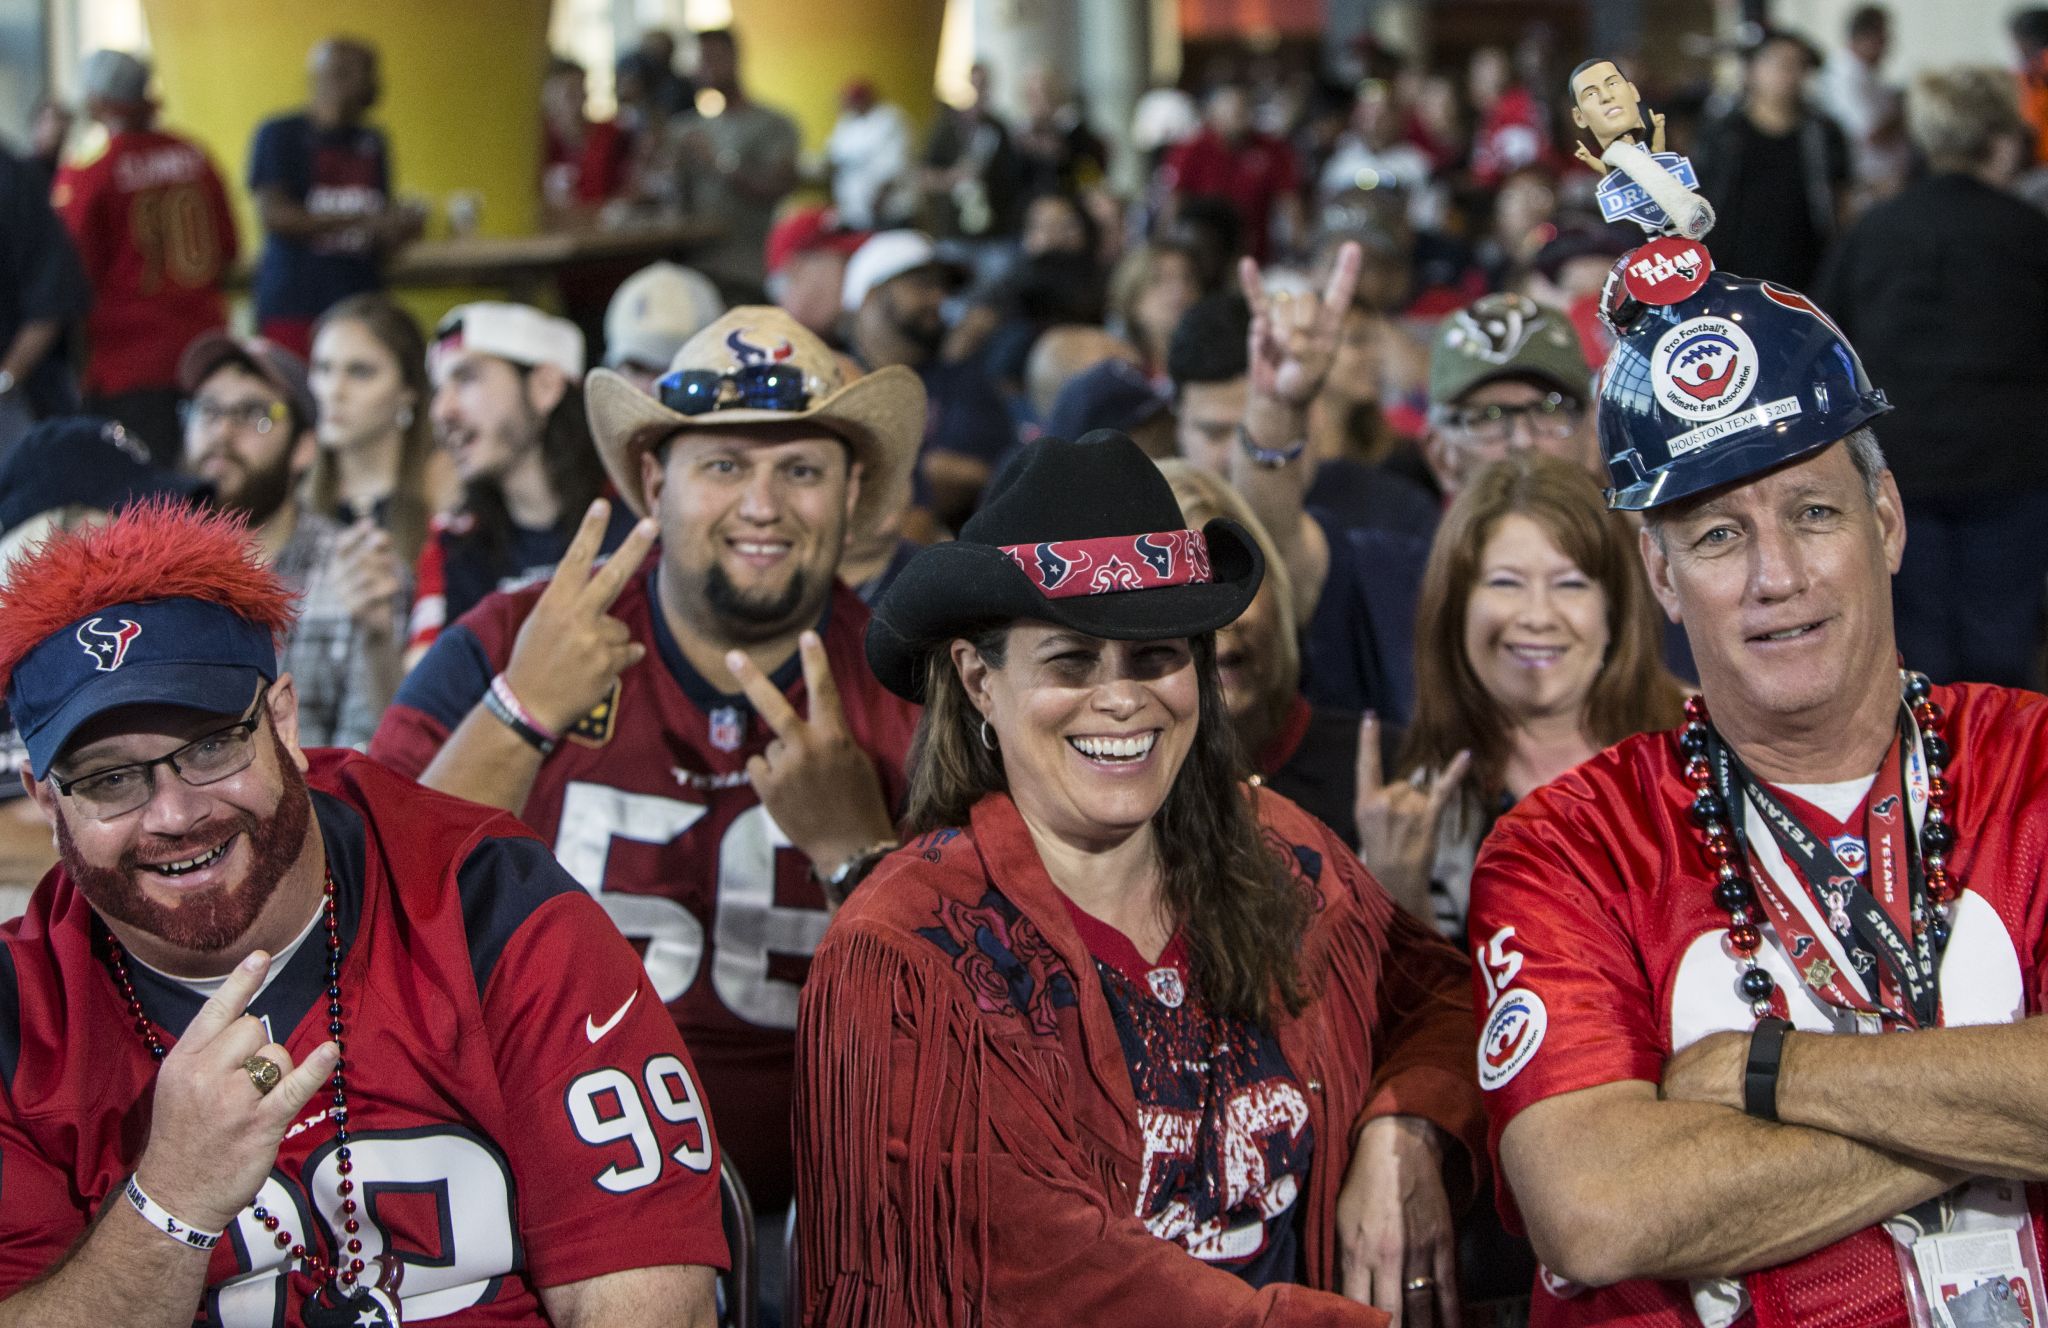 A Houston Texans NFL Draft party actually worth attending